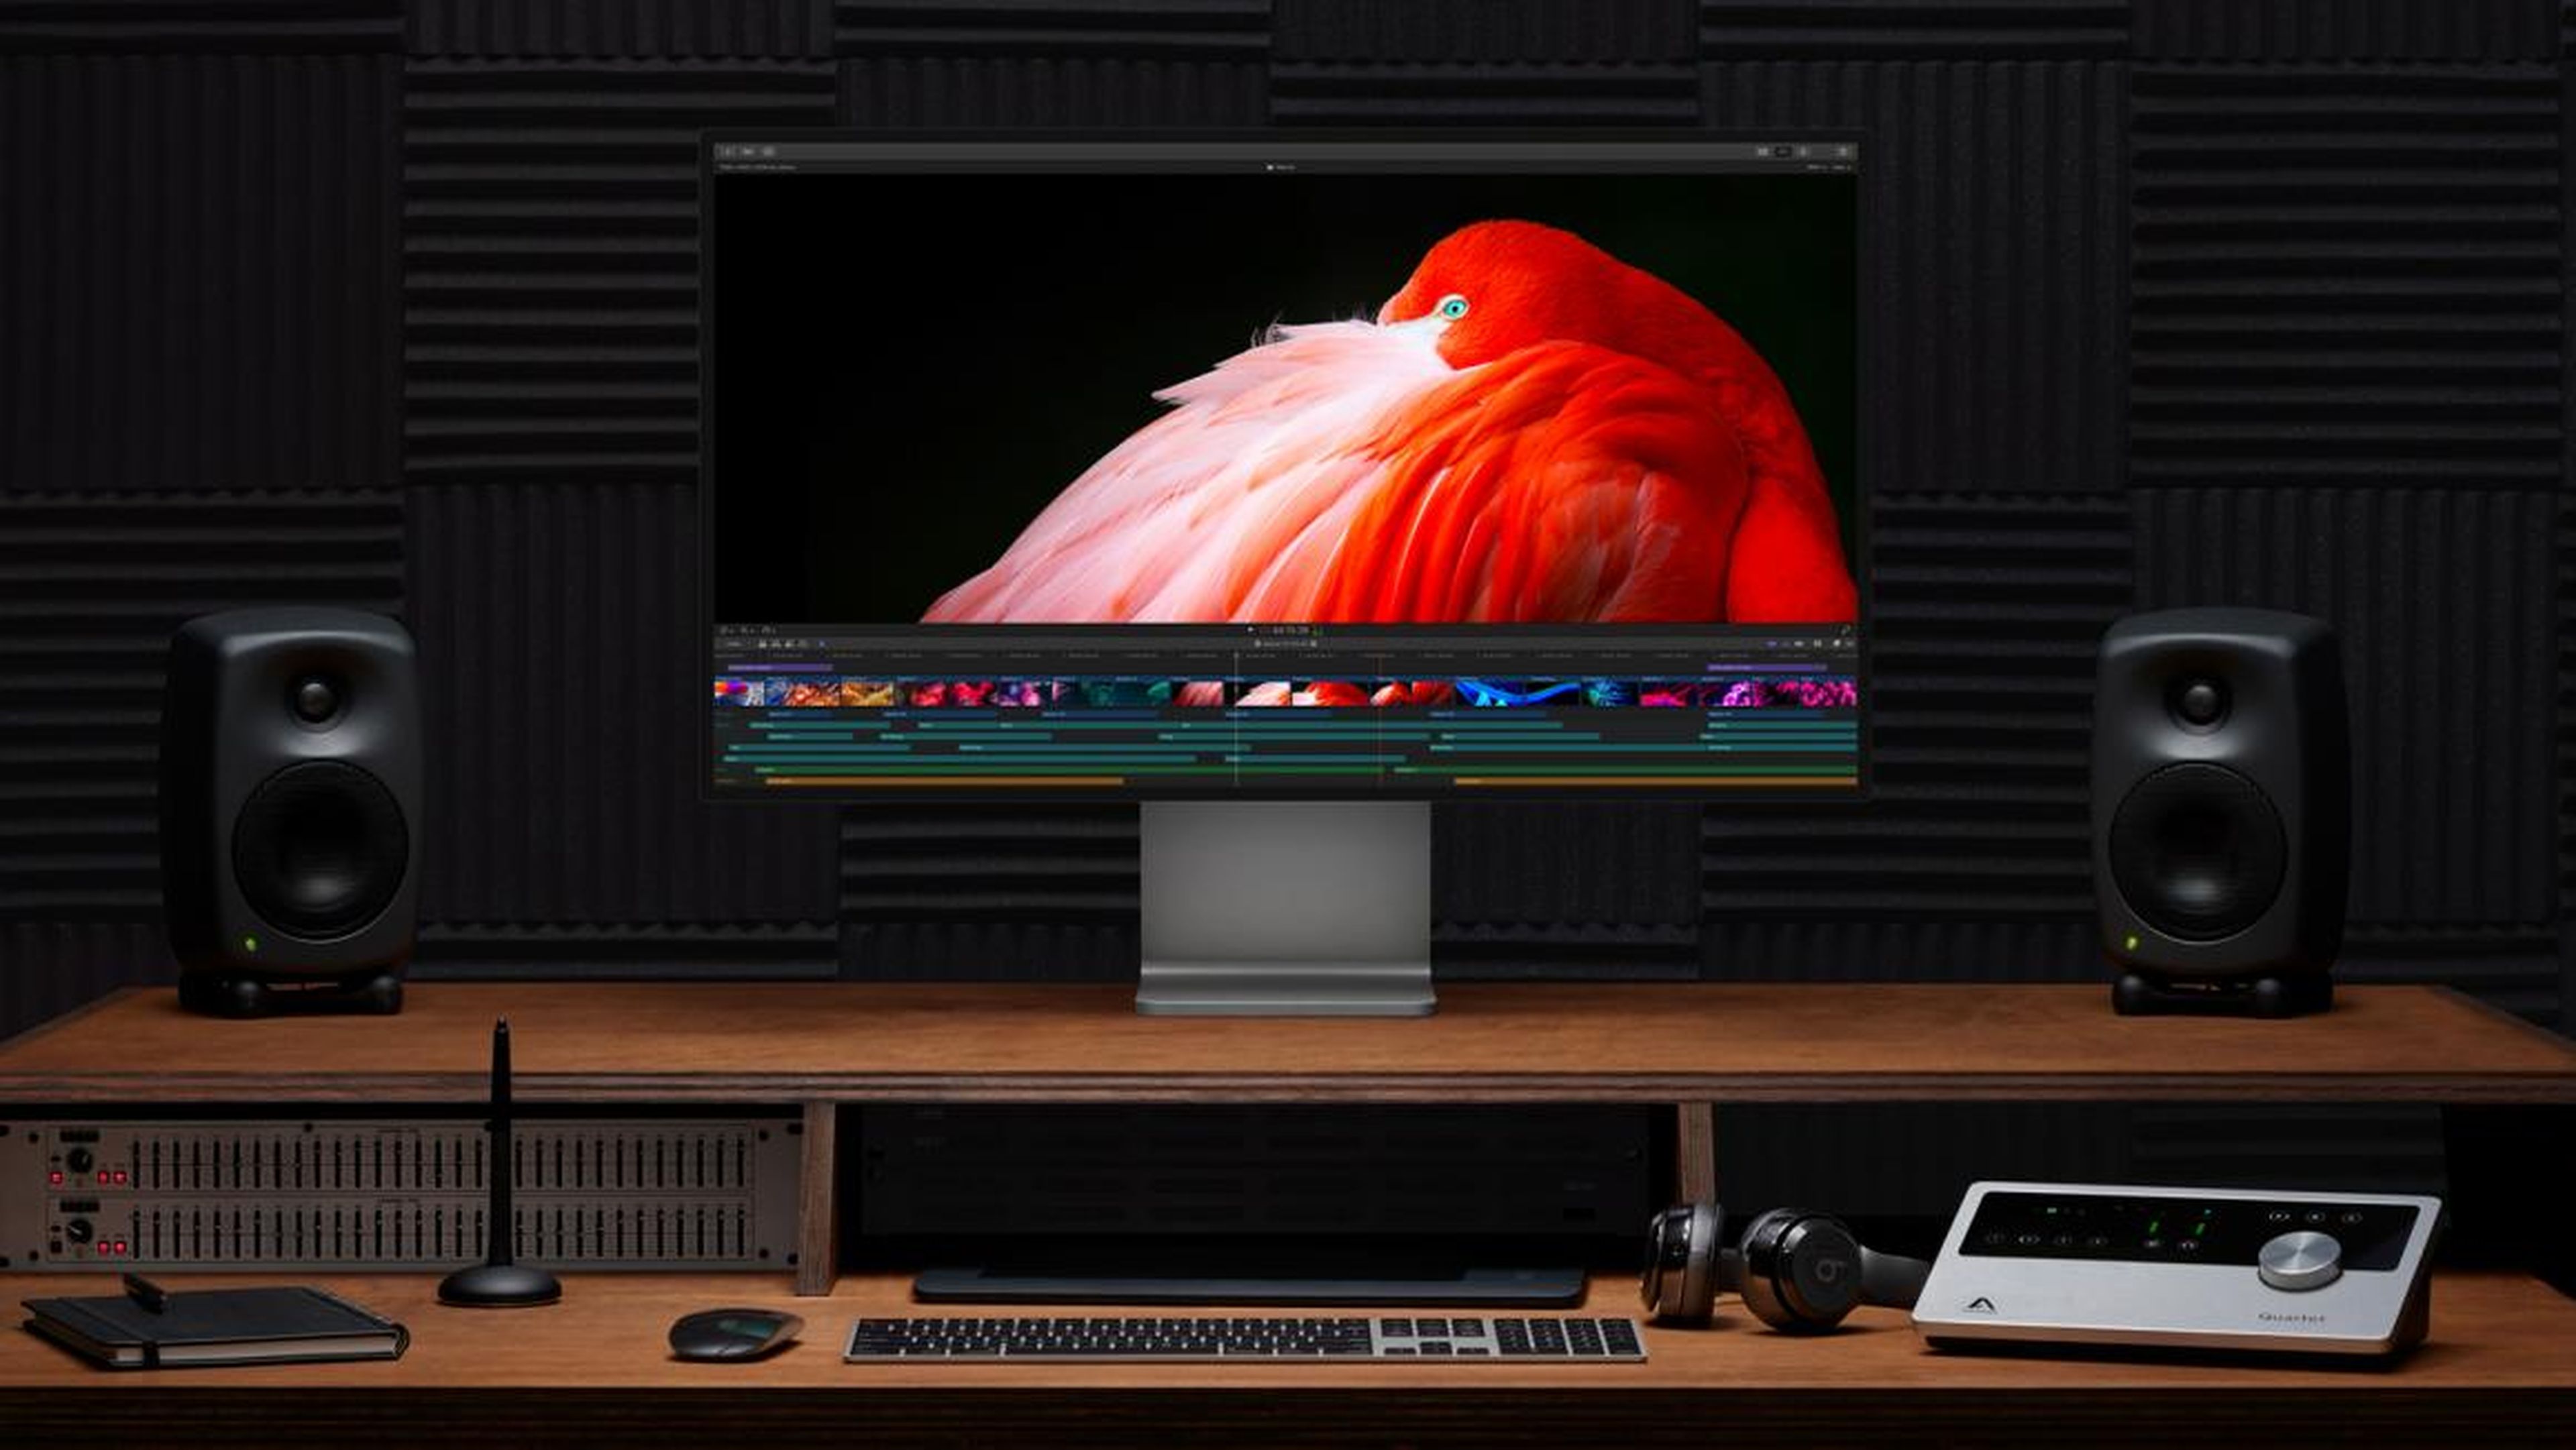 Apple wants to sell you a $1,000 stand so you can use its new $5,000 monitor